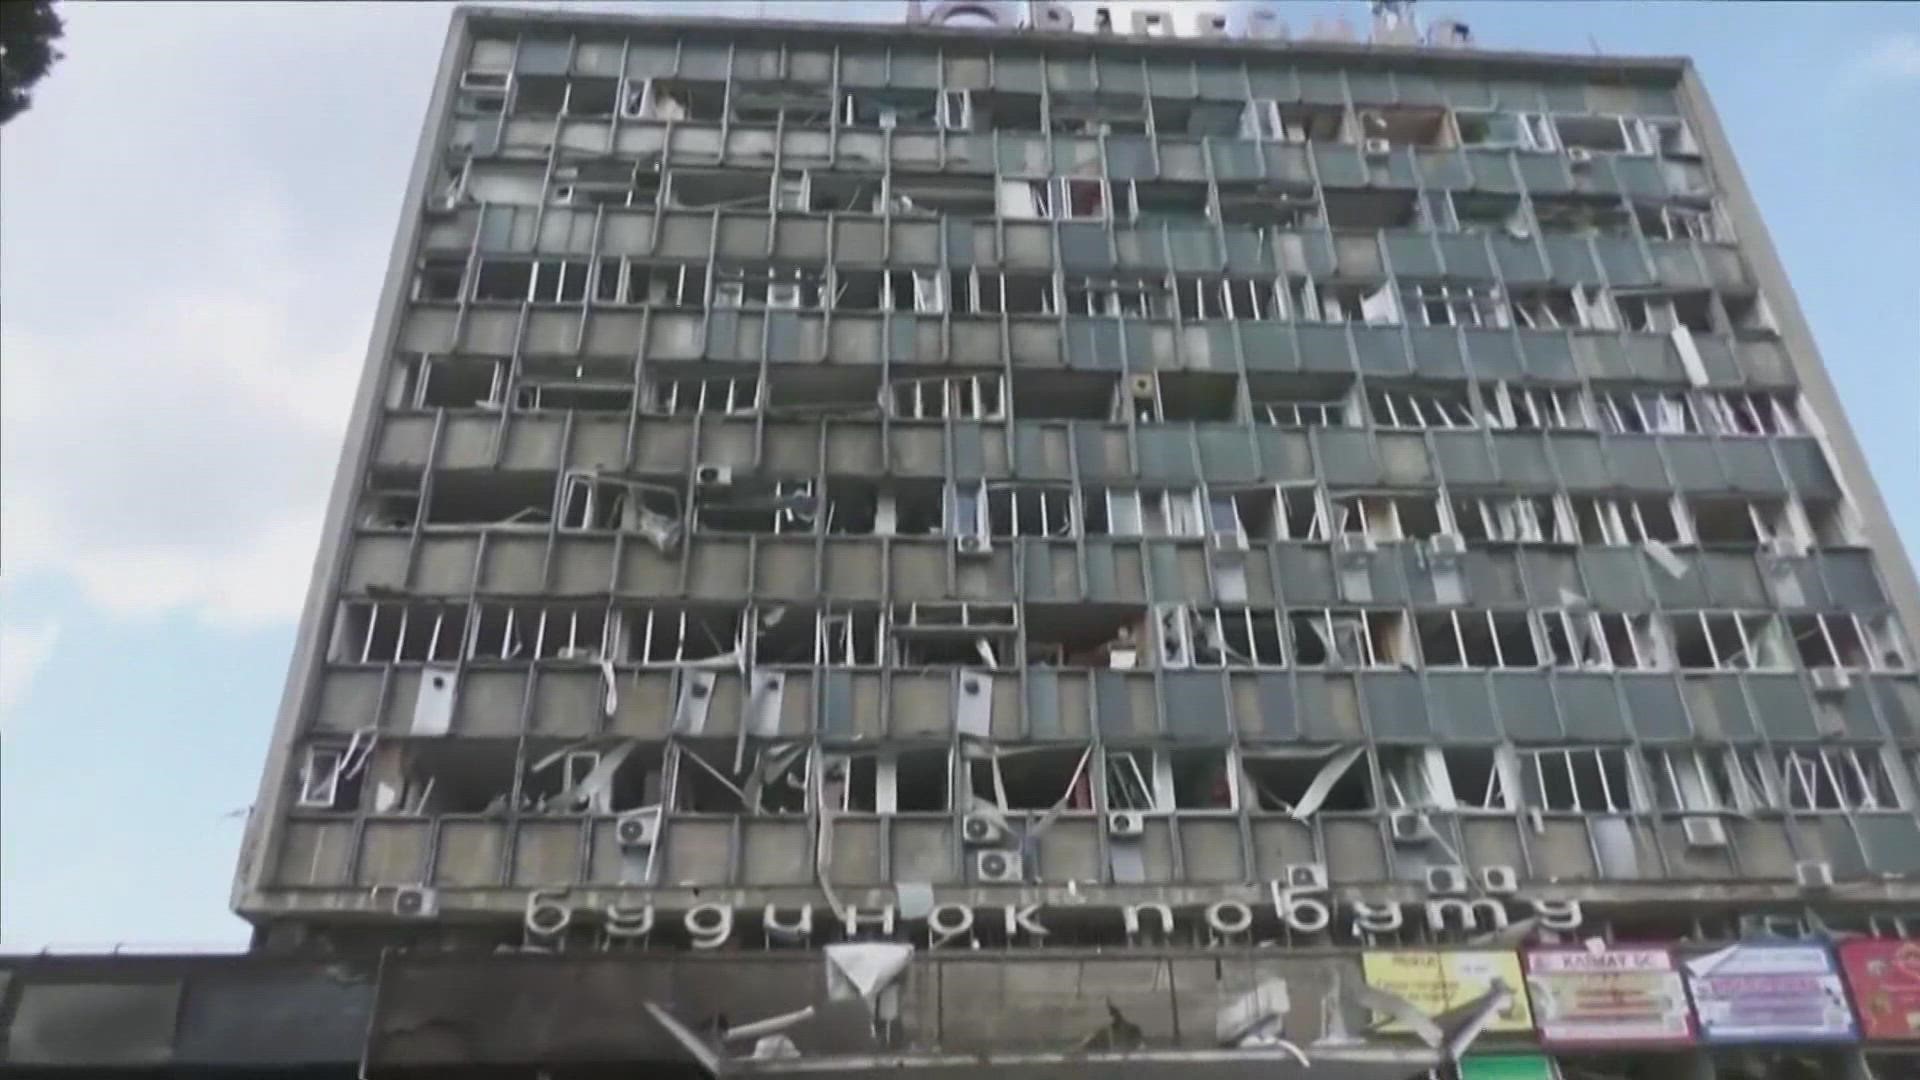 Ukraine officials say some of the victims were children.